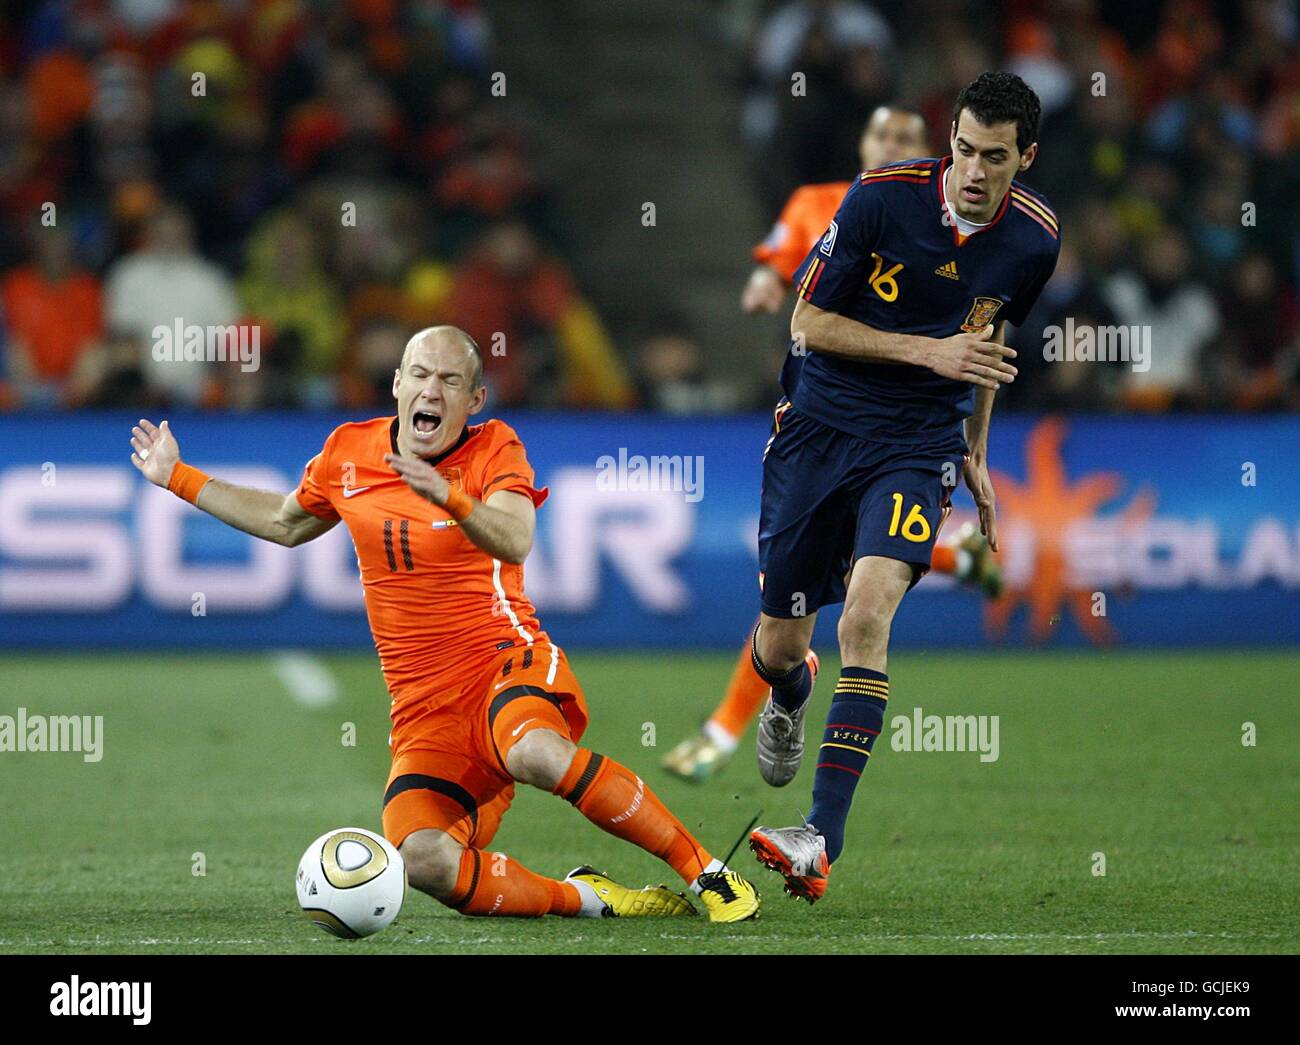 Soccer - 2010 FIFA World Cup South Africa - Final - Netherlands v Spain - Soccer City Stadium. Spain's Sergio Busquets (right) and Netherlands' Arjen Robben (left) battle for the ball Stock Photo